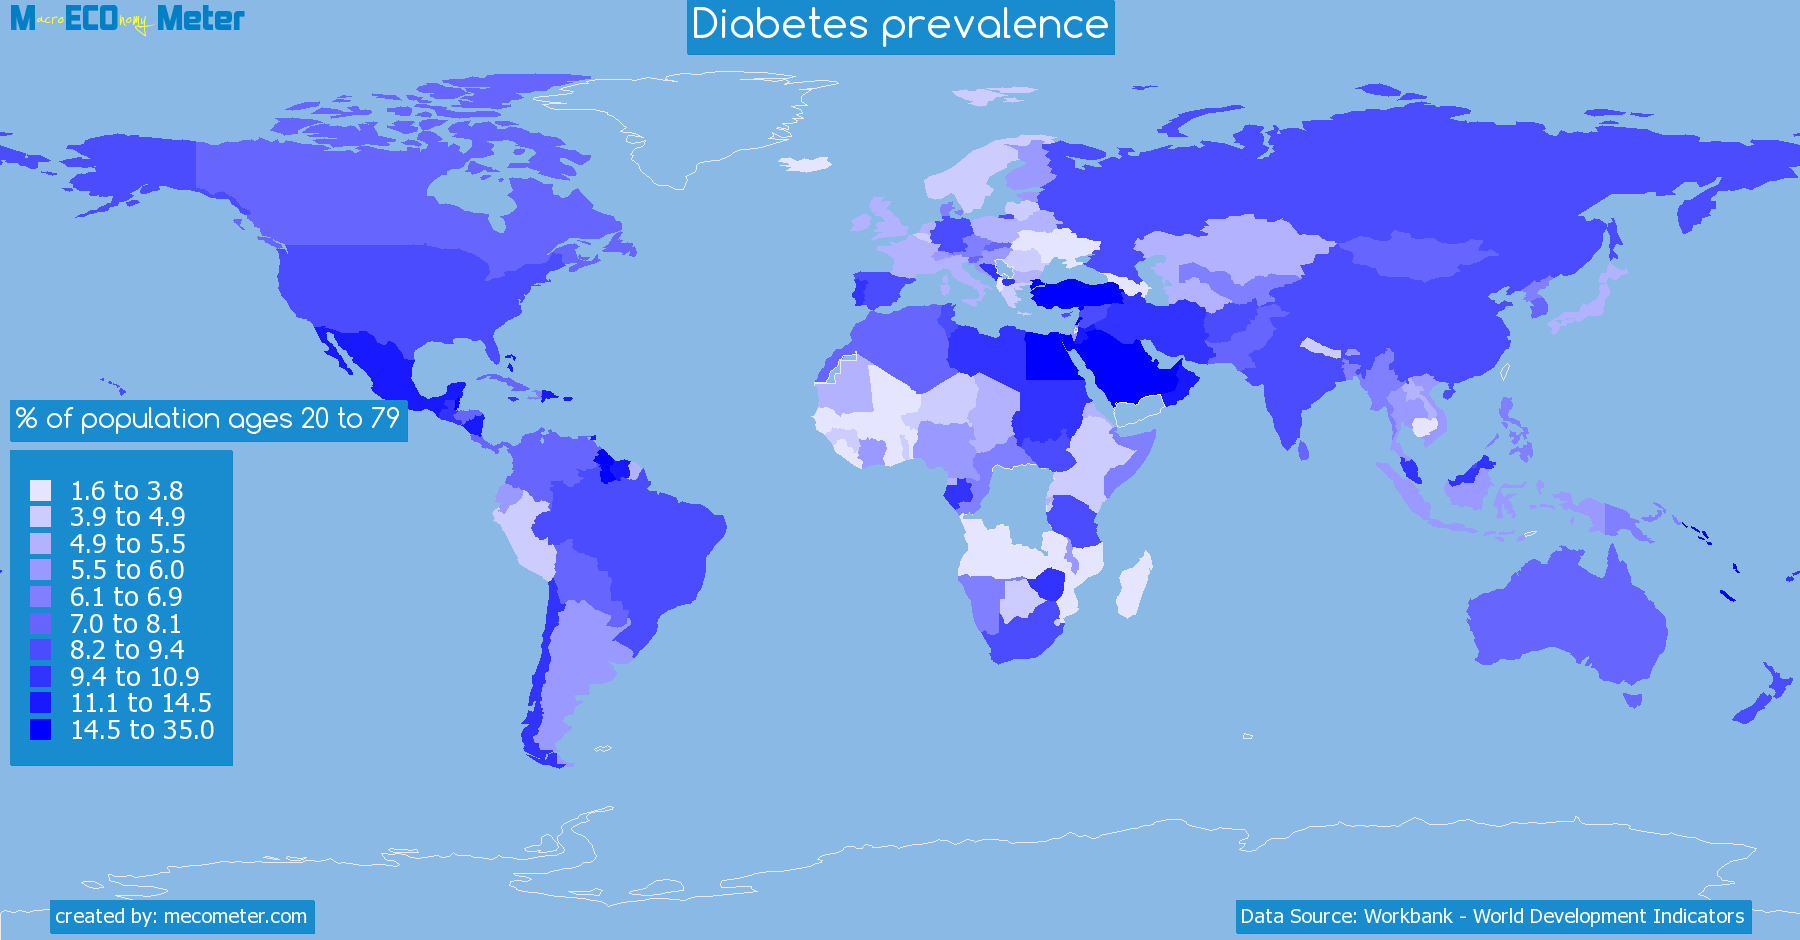 Worldmap of all countries colored to reflect the values of Diabetes prevalence